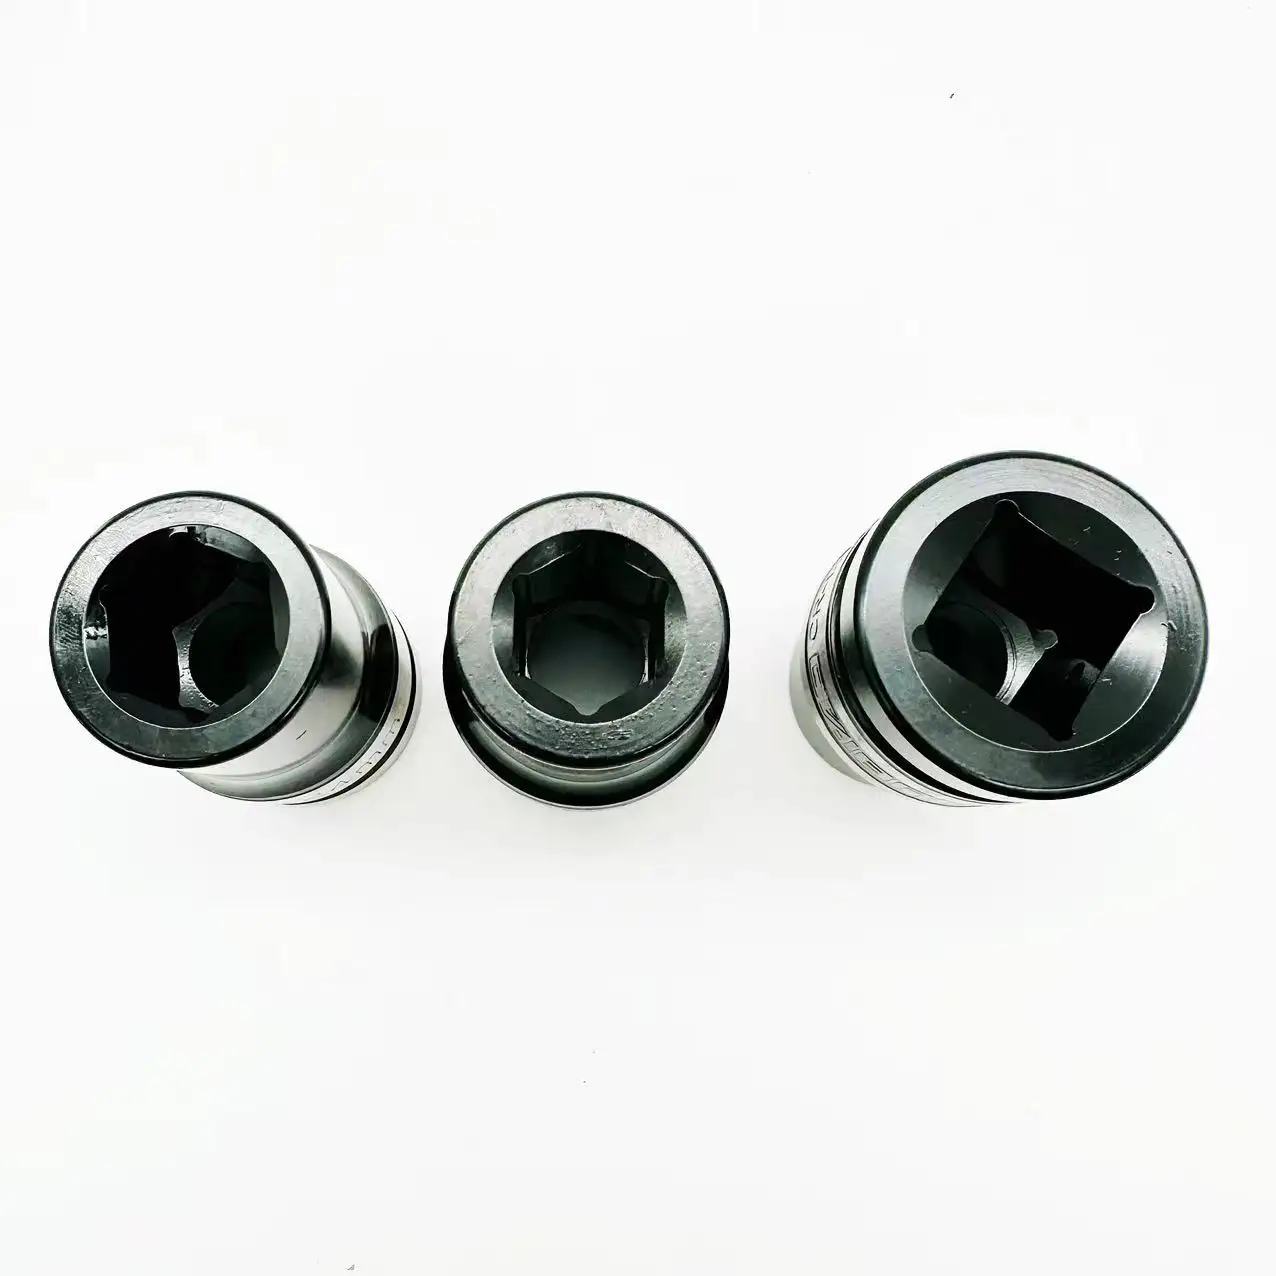 One piece for delivery high-end 10Pcs Tin box set 1" Cr-Mo impact wheel nut deep socket set